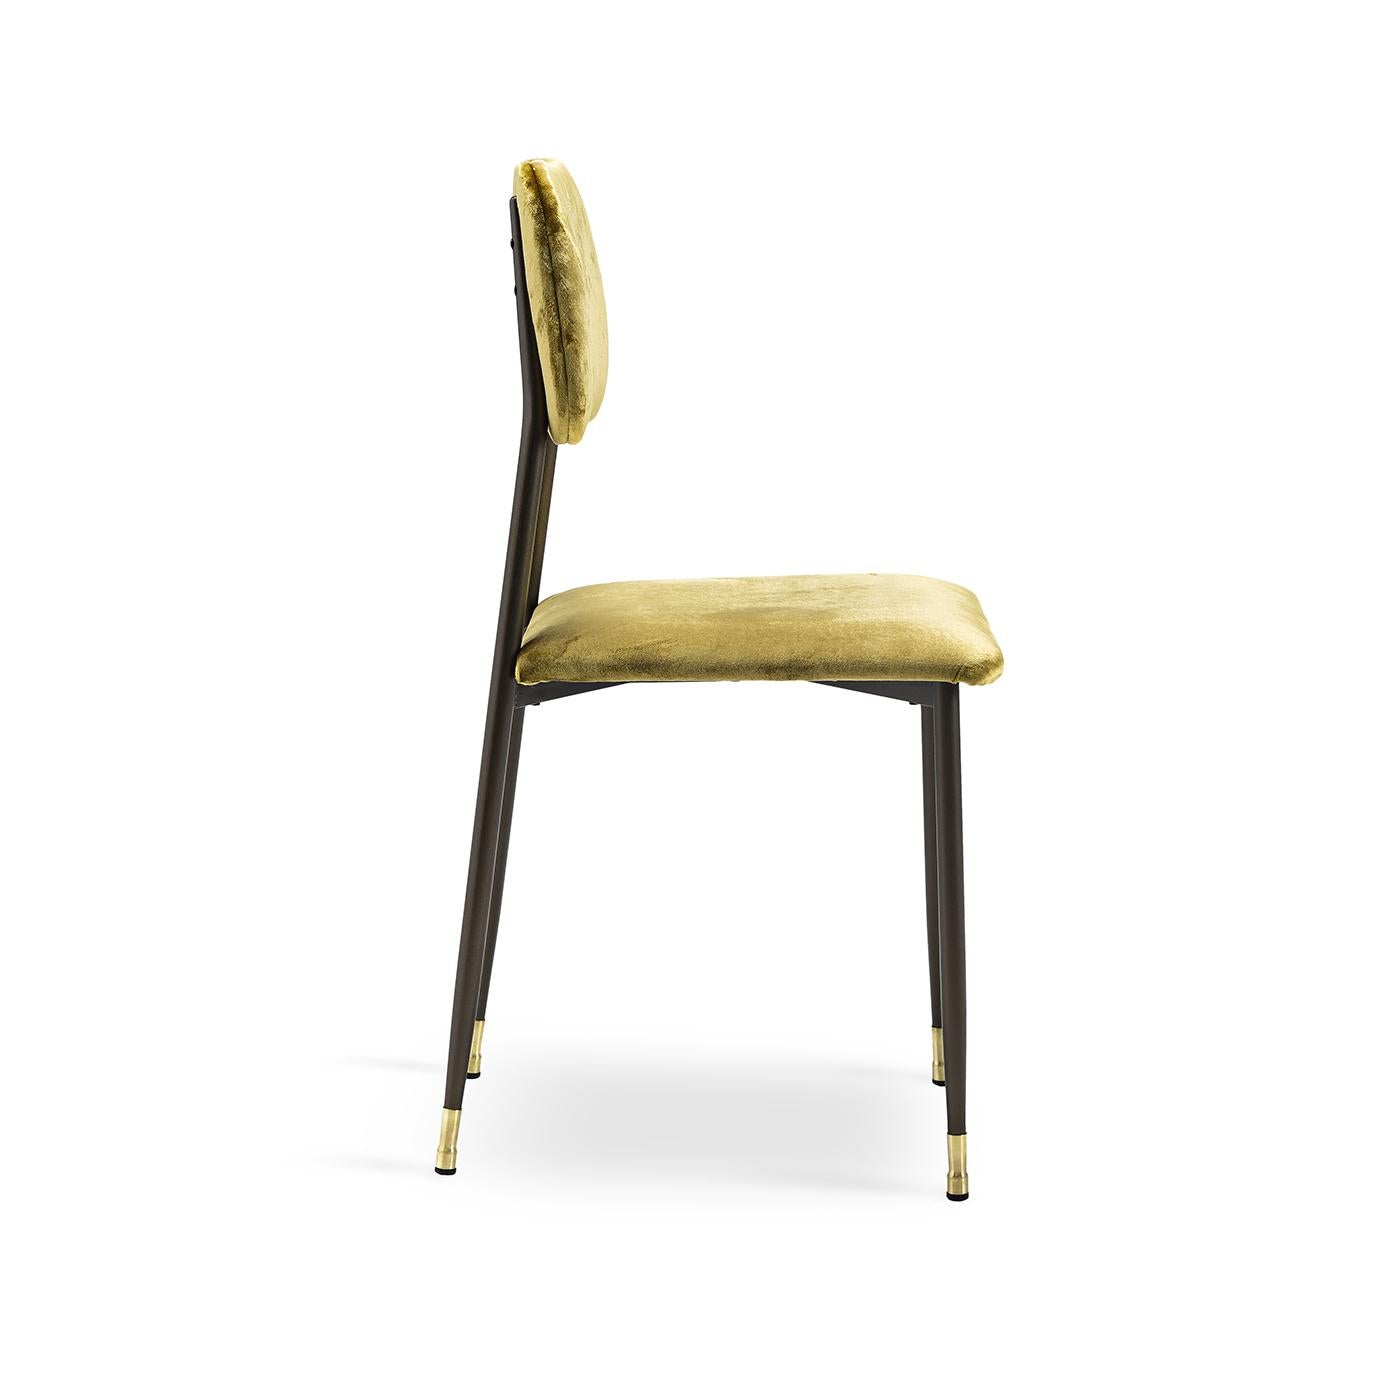 Sunny, bright with a bit of vintage class, this dining chair rests on a slight metal frame and legs that are painted in a brushed bronze finish, with the legs decorated with brass chair guides. The simple but comfortable back and seat, structured